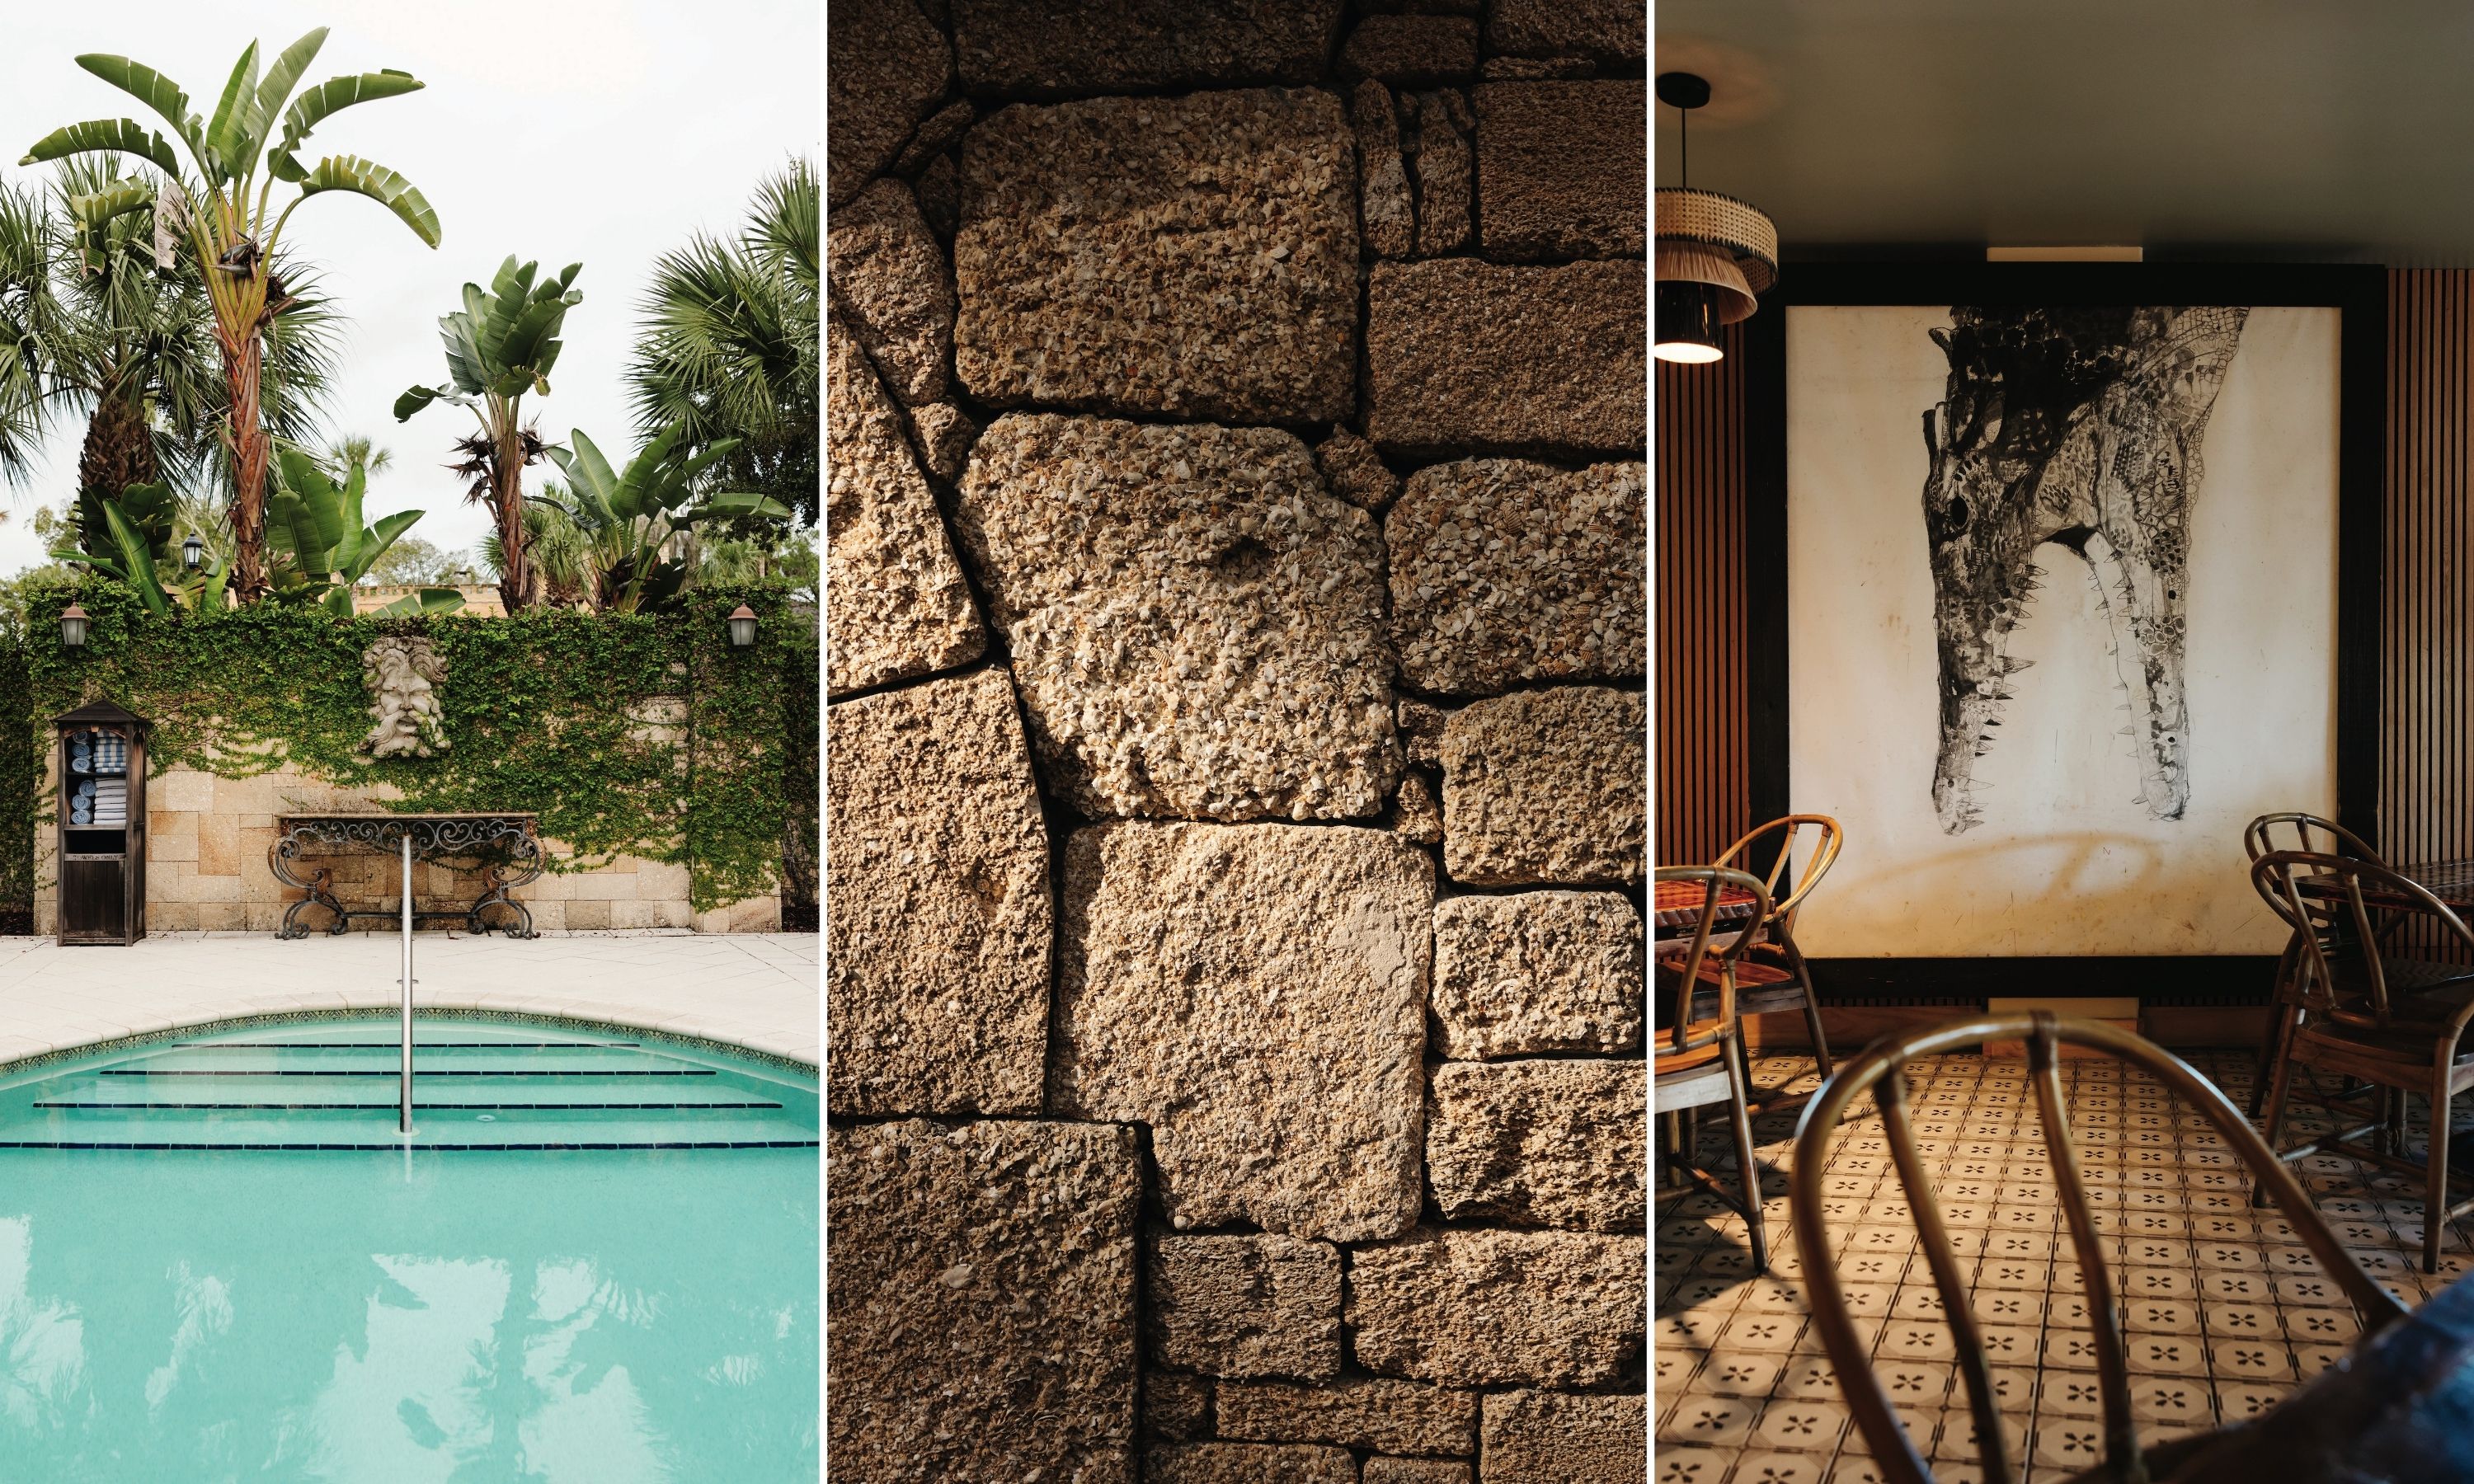 A collage of three images: an aquamarine pool; a detail of a stone wall; a painting of an alligator in a restaurant.